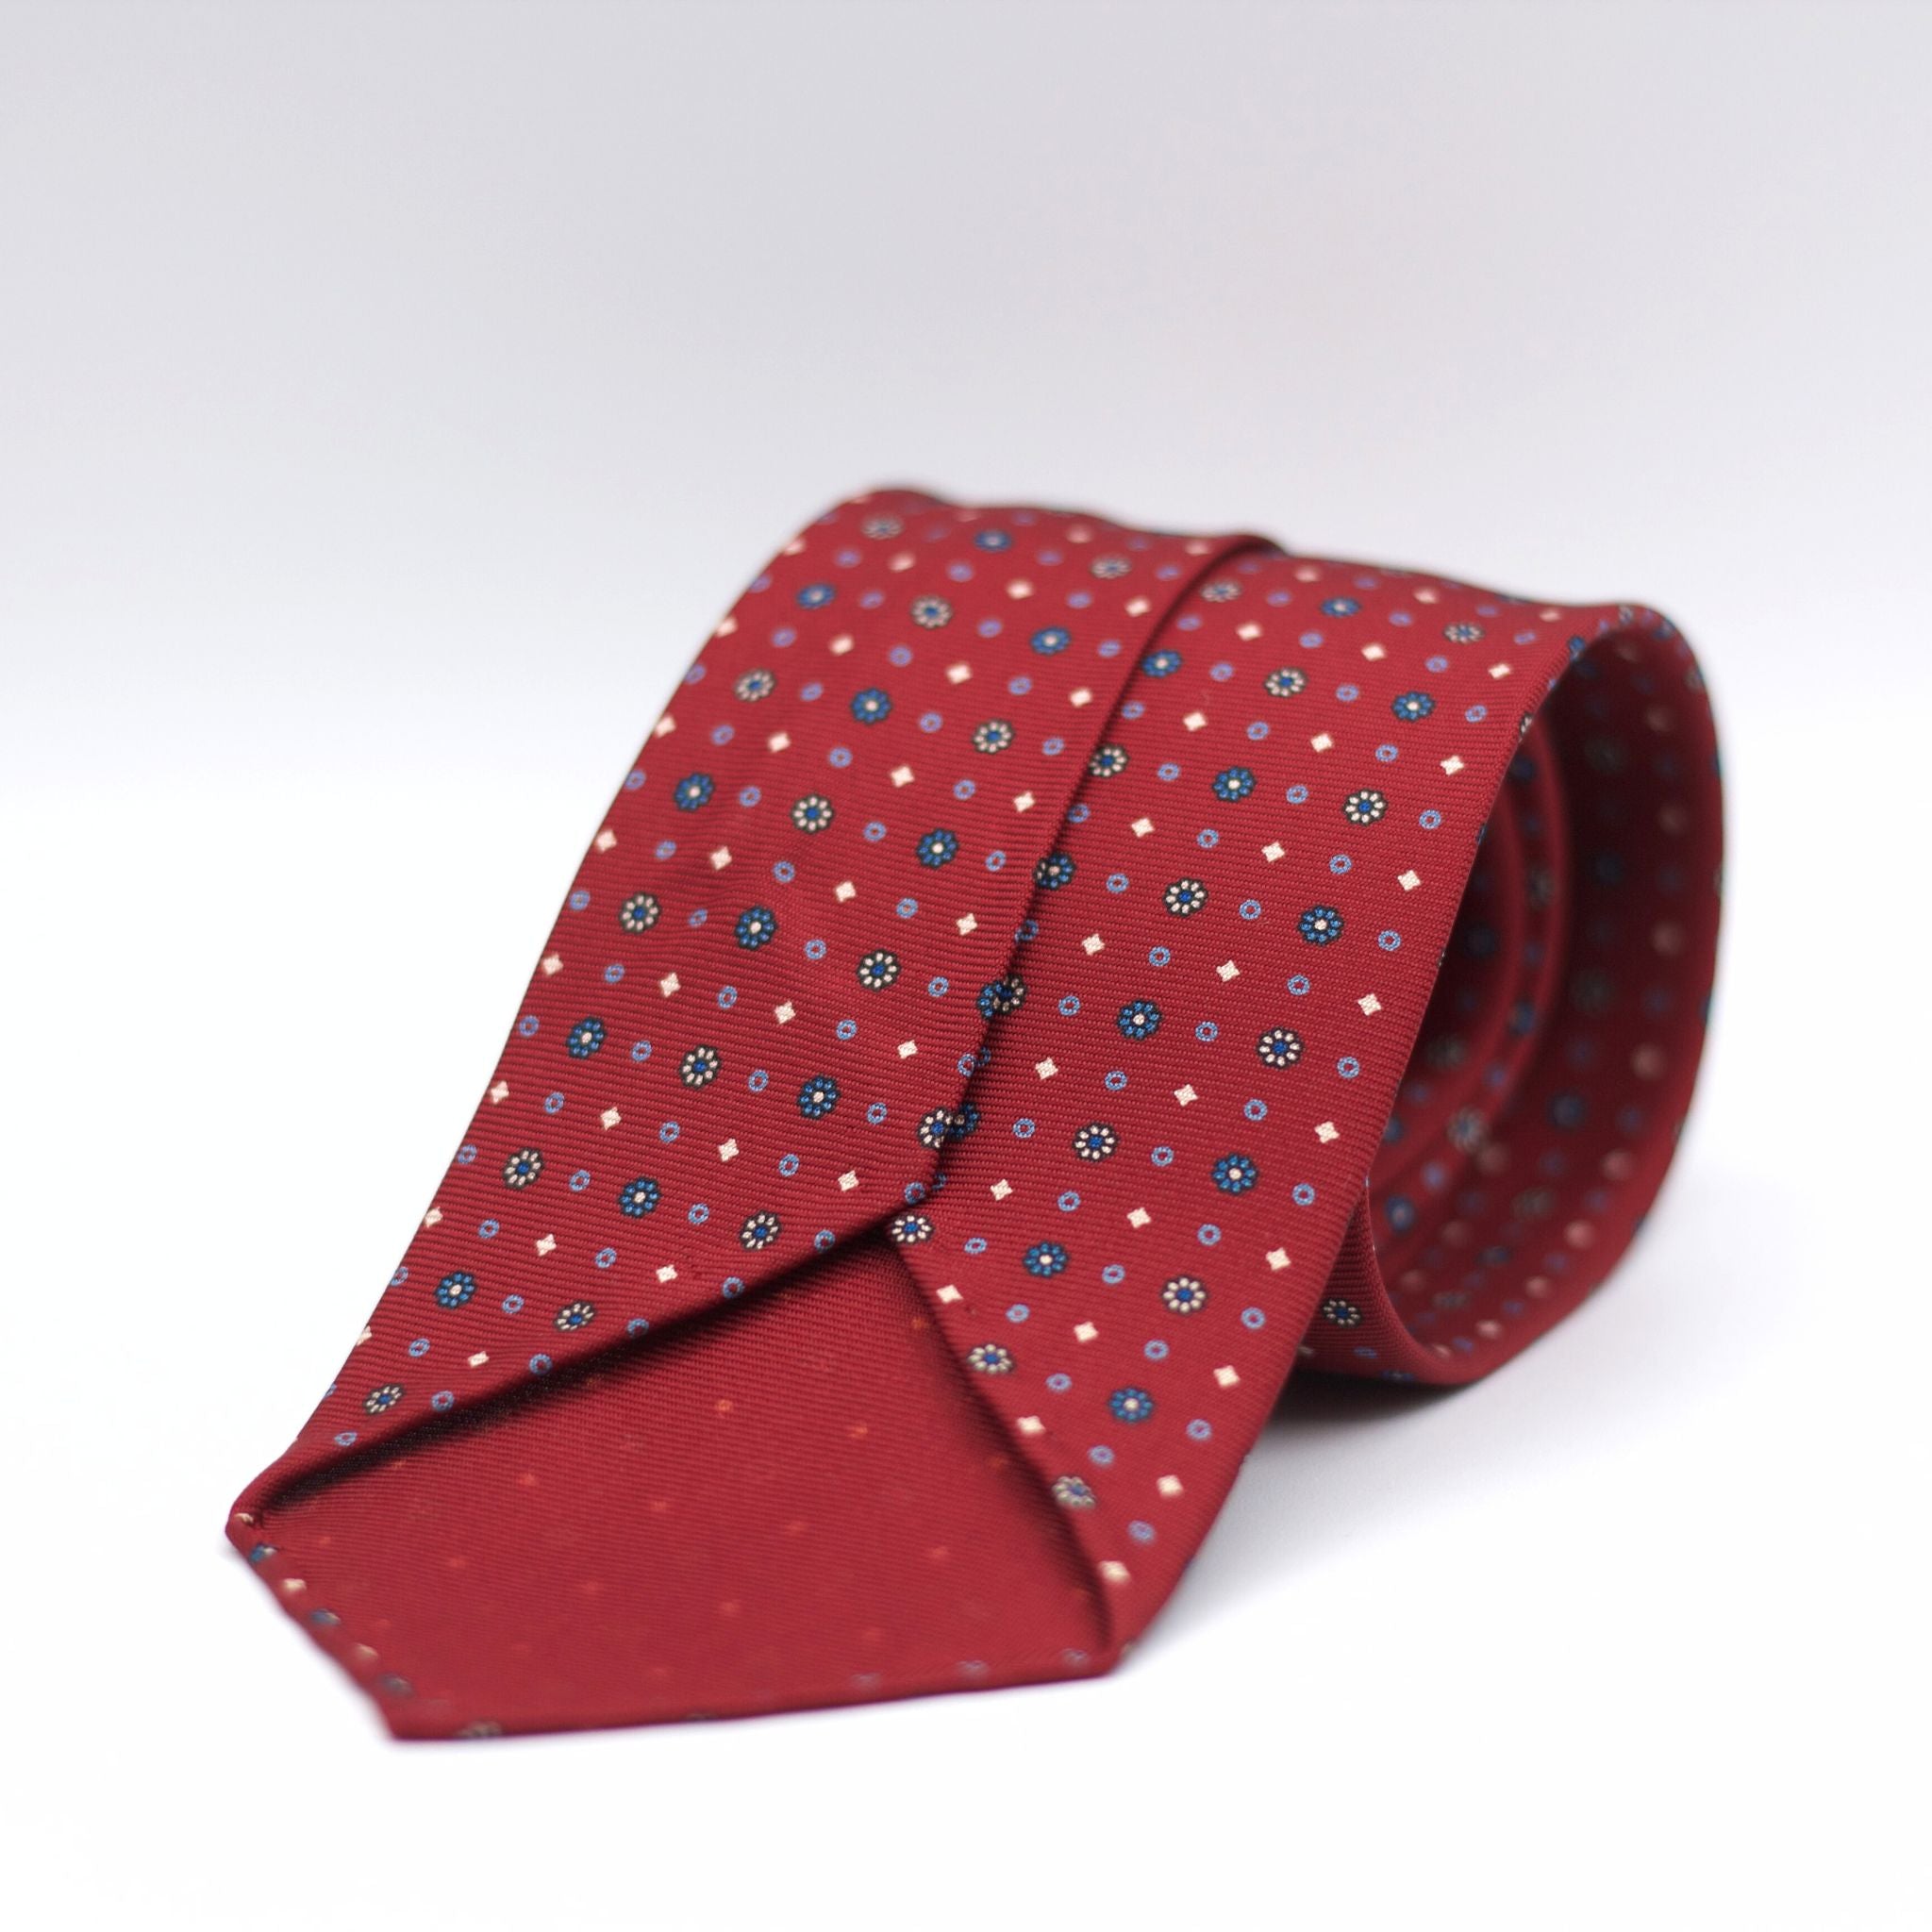 Cruciani & Bella 100% Printed Silk 36 oz UK fabric Unlined Red, Light Blue and Cream Unlined Tie Handmade in Italy 8 x 150 cm